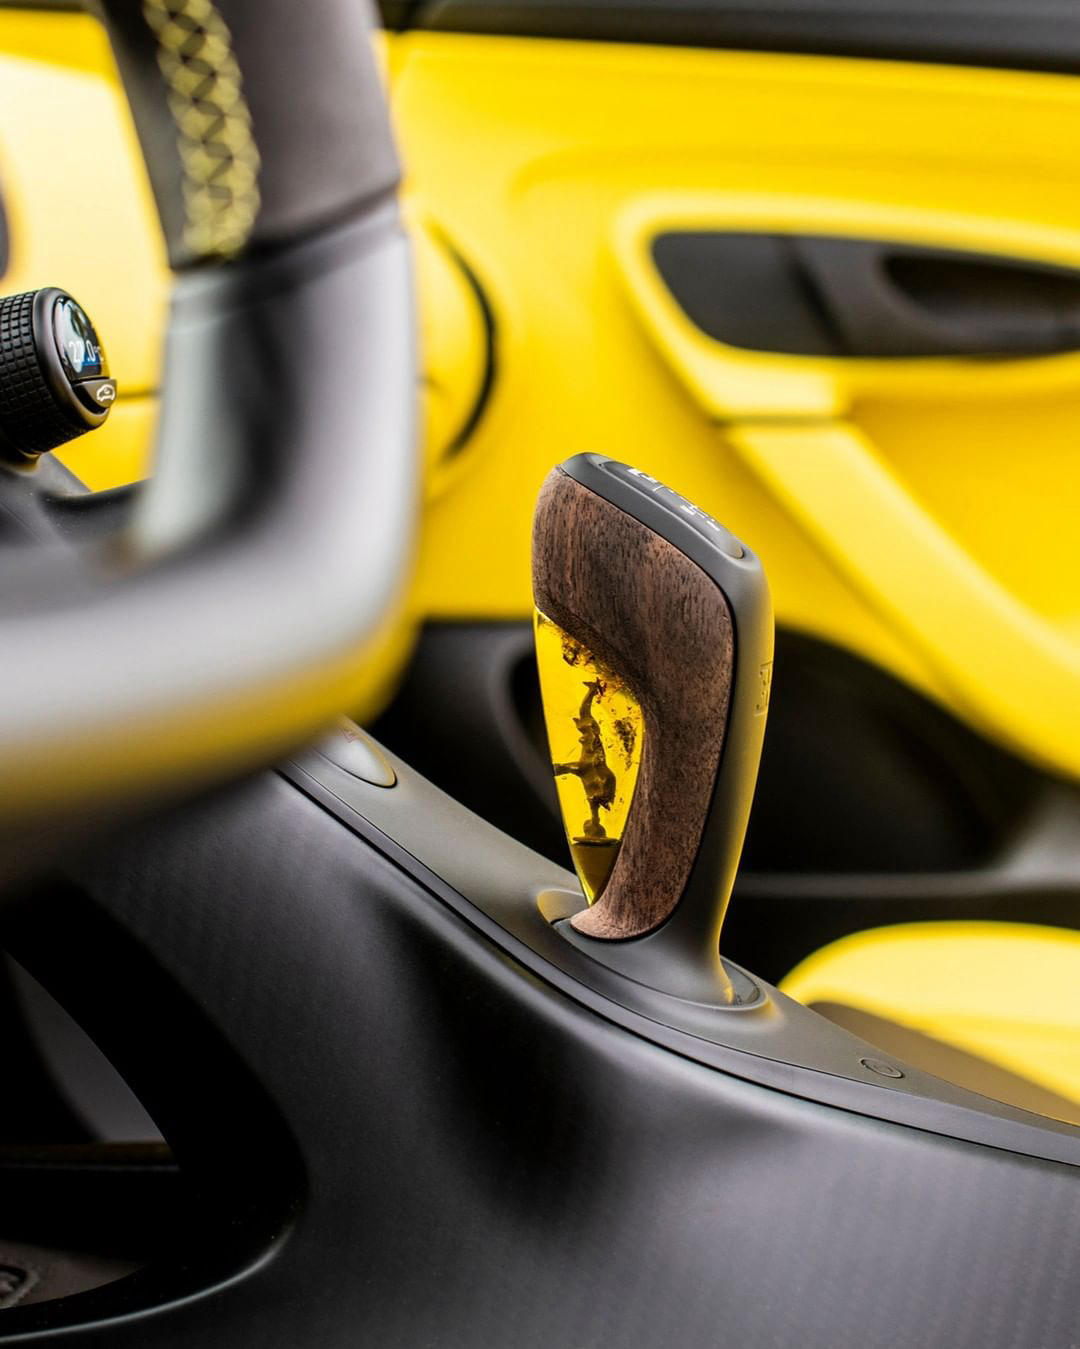 image  1 BUGATTI - Black and yellow is a duo-tone finish that can be traced throughout BUGATTI’s history